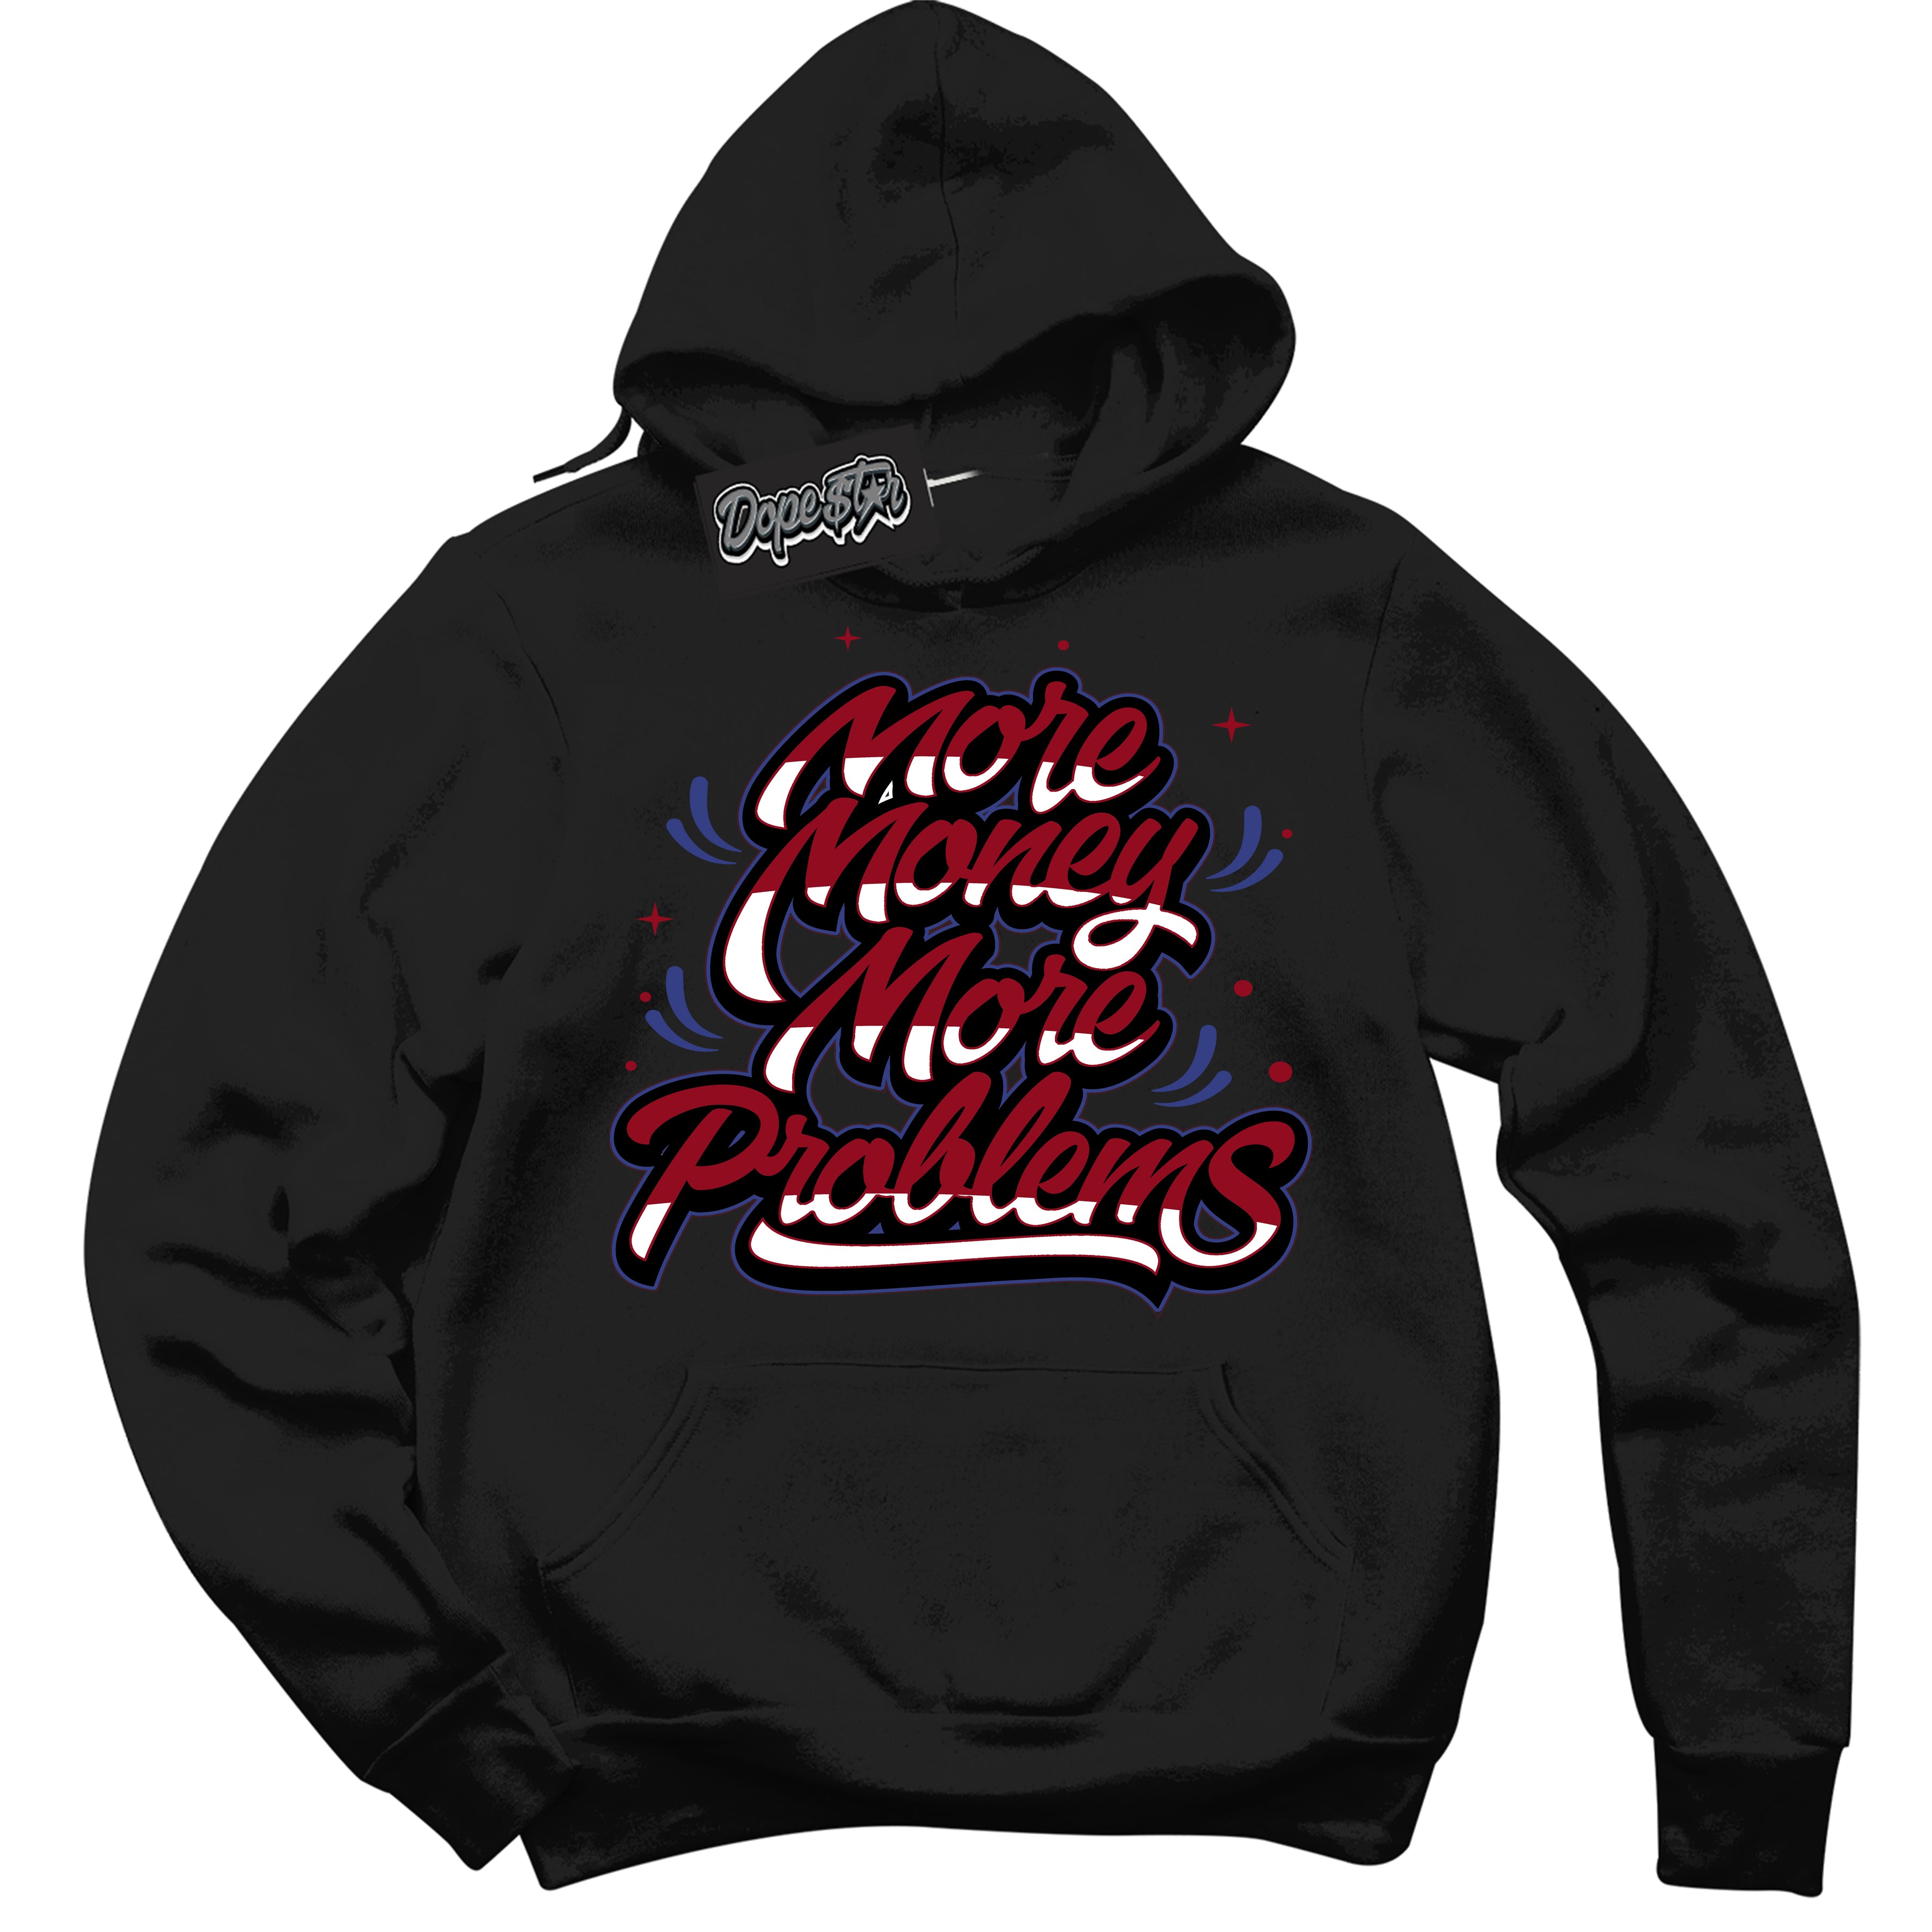 Cool Black Hoodie with “ More Money More Problems ”  design that Perfectly Matches Playoffs 8s Sneakers.